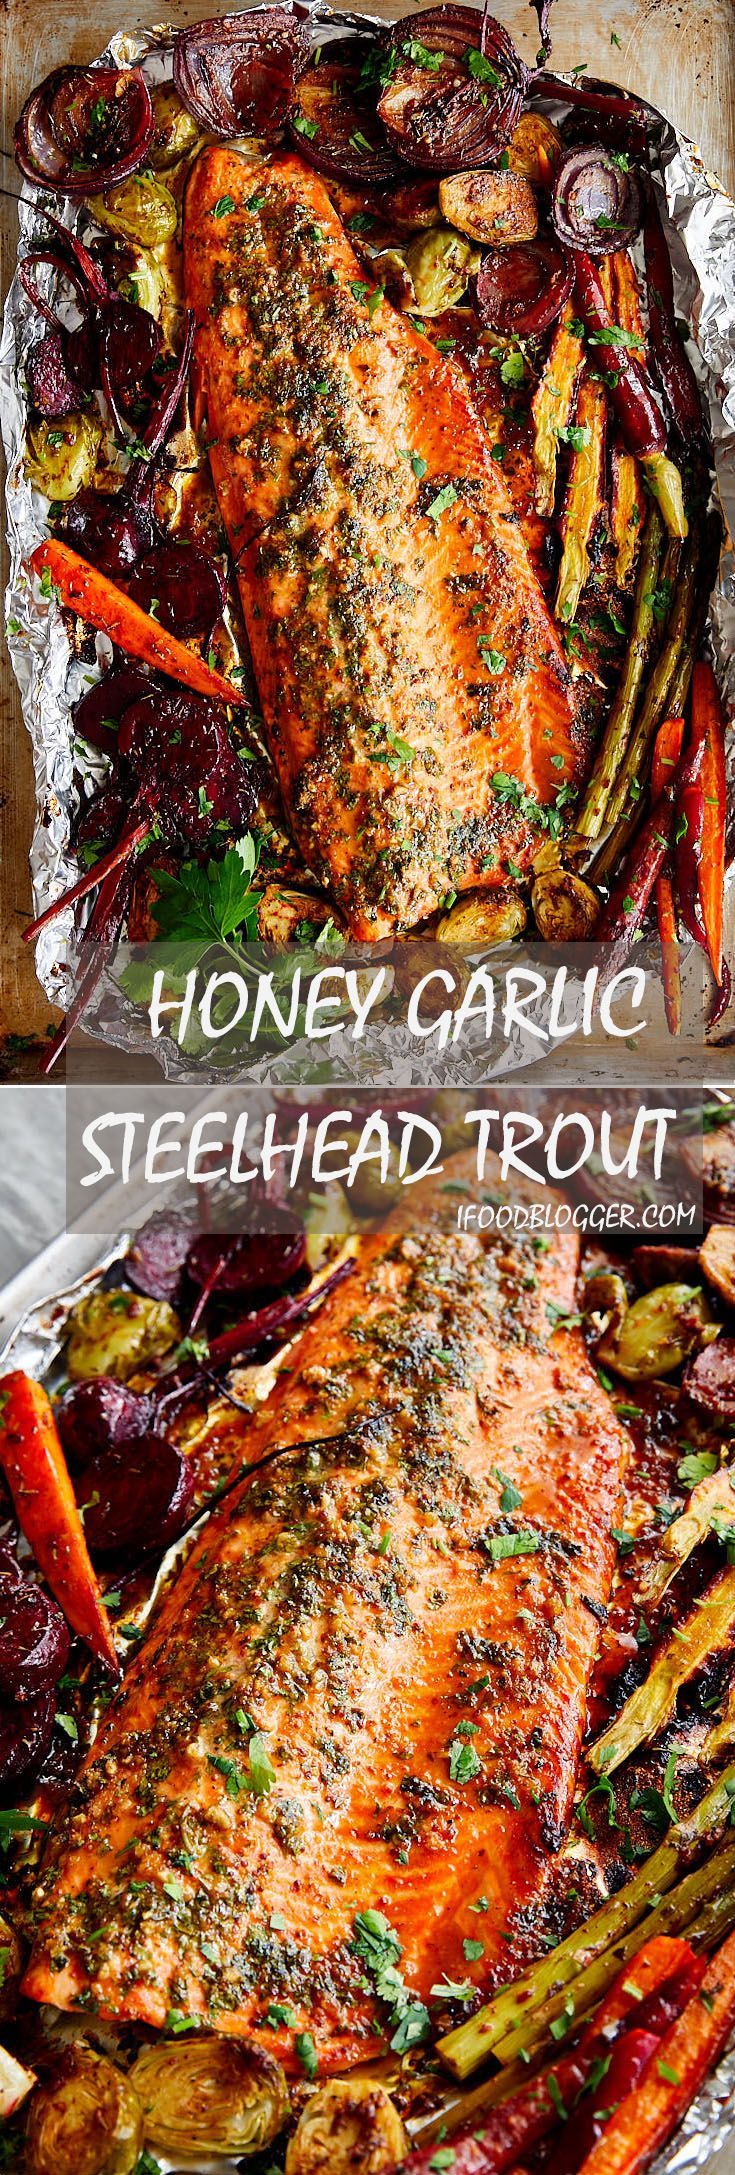 Baked Honey Garlic Steelhead Trout Recipe. The recipe is very simple and the dish is very flavorful. For best results, marinate the fish for at least two hours.| ifoodblogger.com -   24 fish recipes trout
 ideas